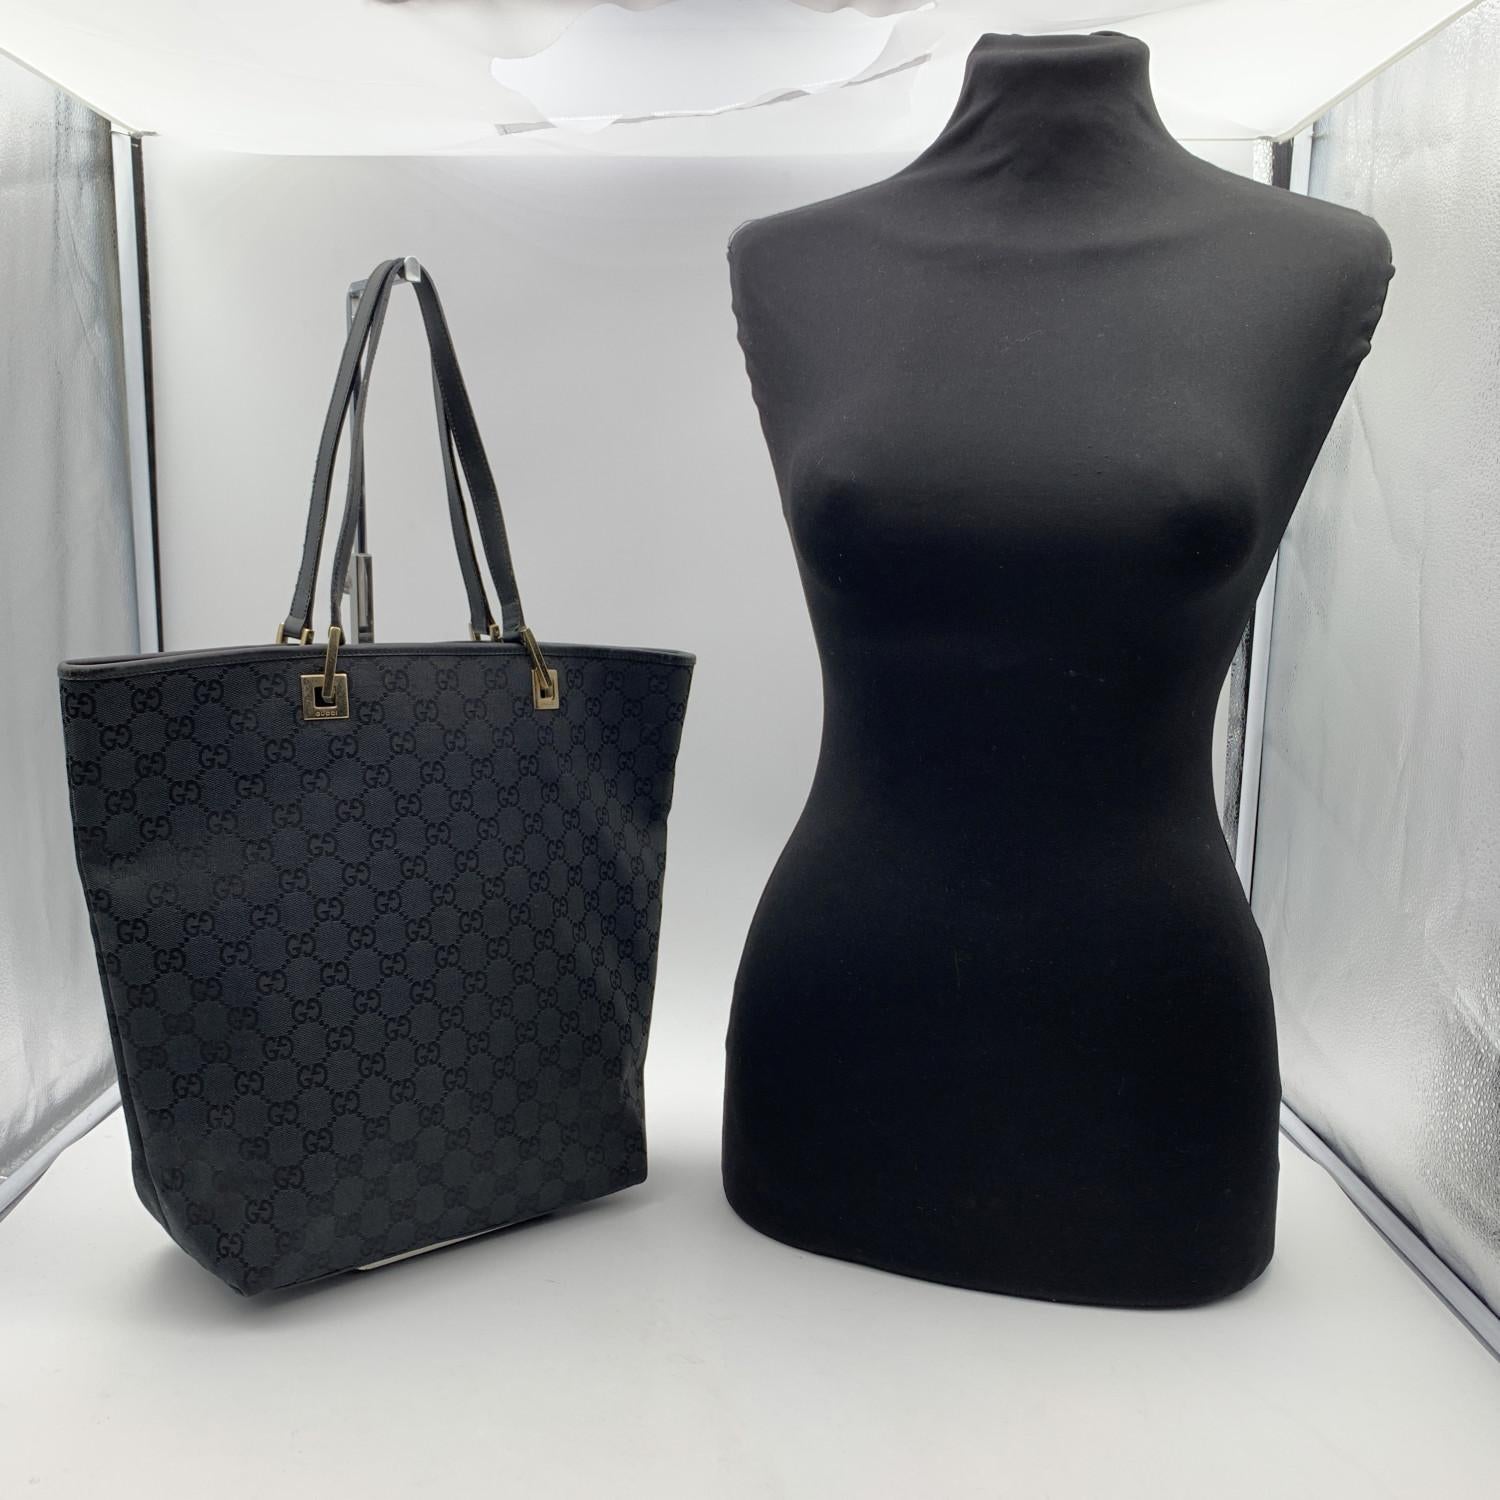 Gucci tote crafted in black monogram canvas with black genuine leather trim and shoulder strap. Signed light gold metal hardware. Open top. Inside, black fabric lining. 1 side zip pocket inside. 'GUCCI - made in Italy' tag inside (with serial number